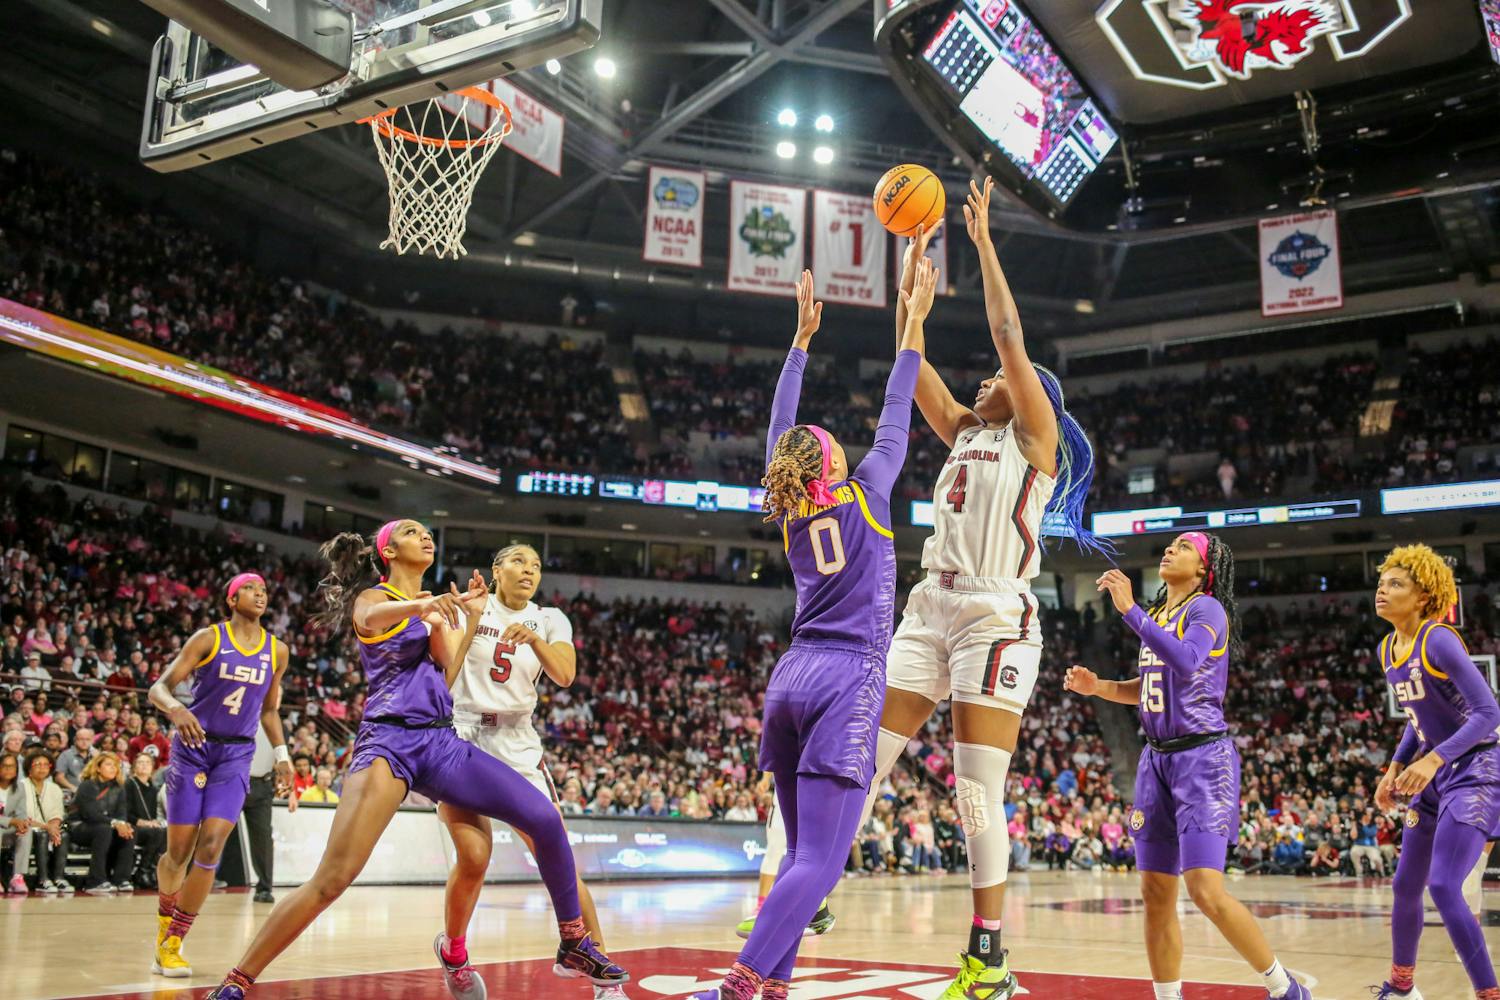 The South Carolina women's basketball team dominated LSU on Feb. 12, 2023, winning 88-64. This victory is the 25th of the season for the Gamecocks and the first loss of the season for the Tigers. The Gamecocks are the only team to remain undefeated in the NCAA for women's basketball.&nbsp;